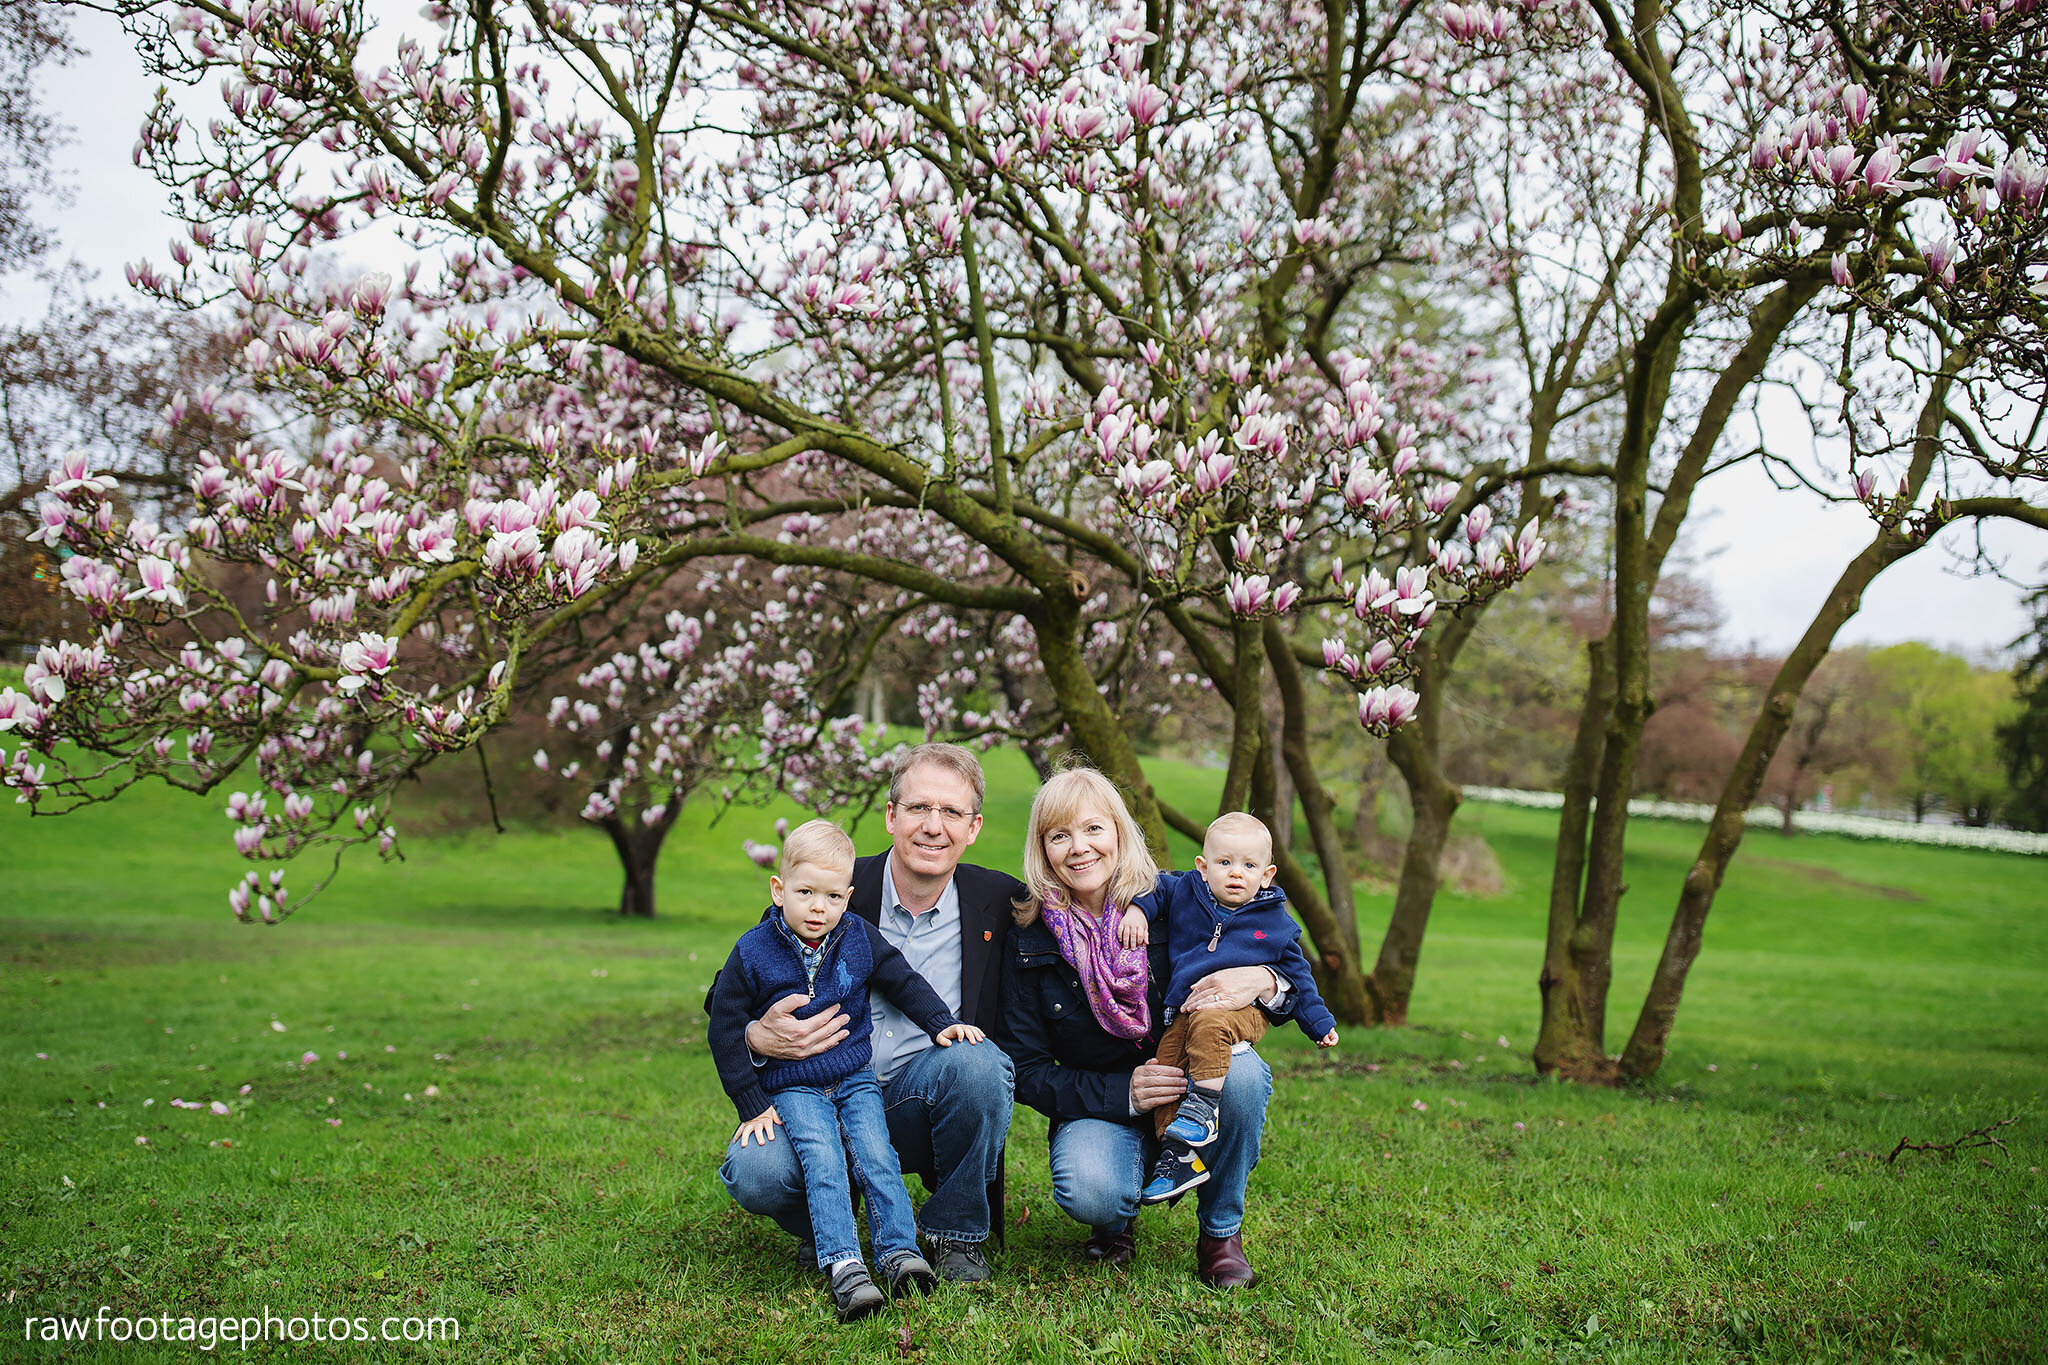 london_ontario_family_photographer-raw_footage_photography-spring_blossoms-extended_family_session-magnolia-blossoms_011.jpg